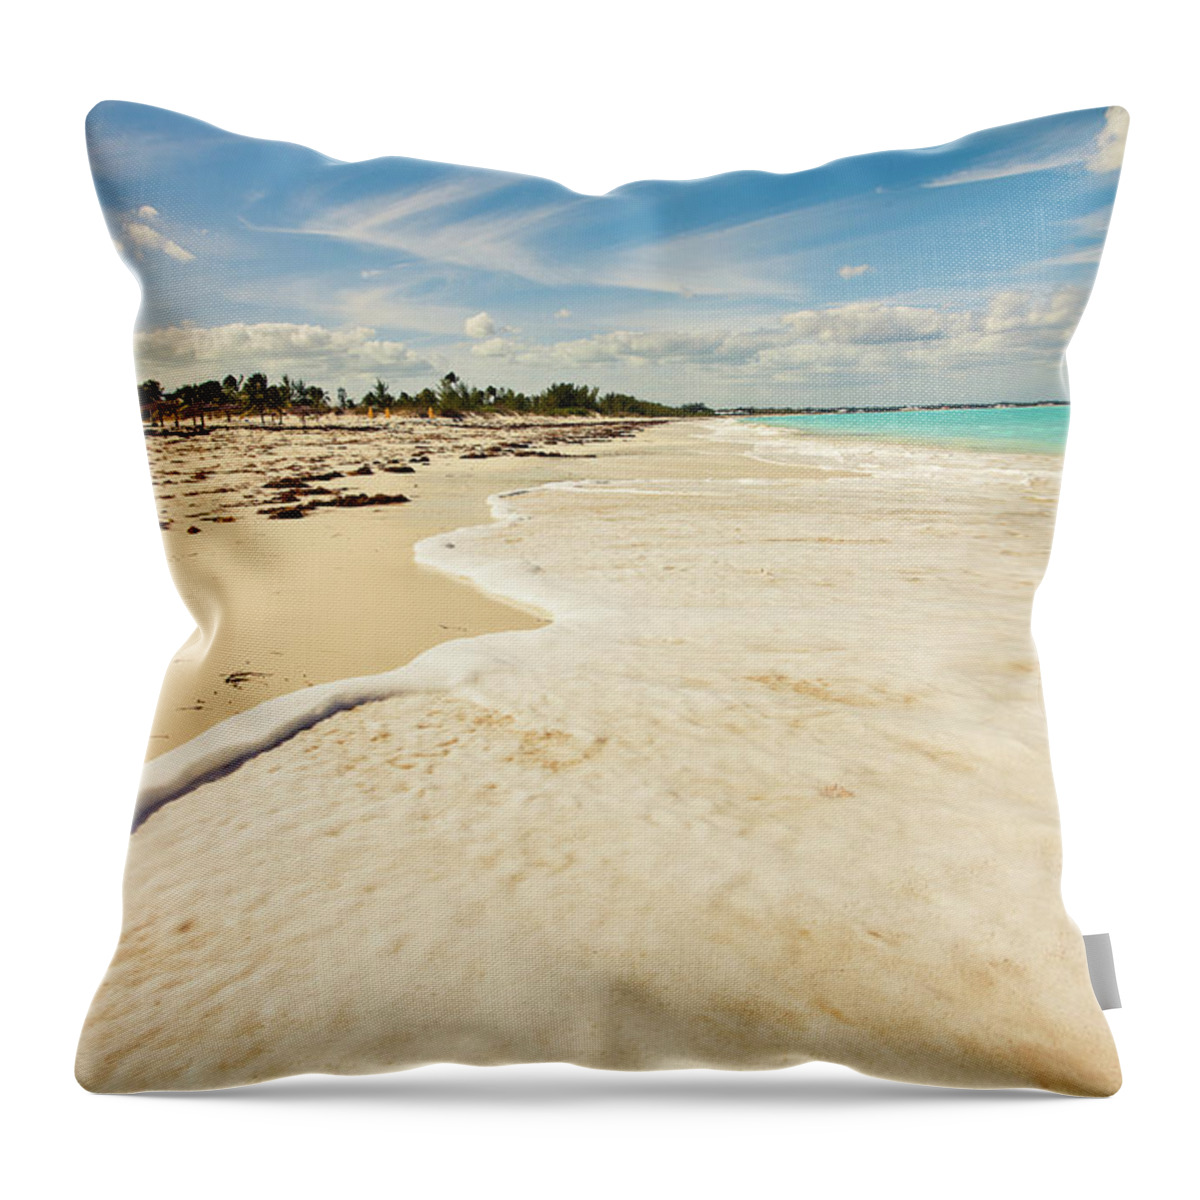 Walking Throw Pillow featuring the photograph Walking At High Tide by Susan Bryant